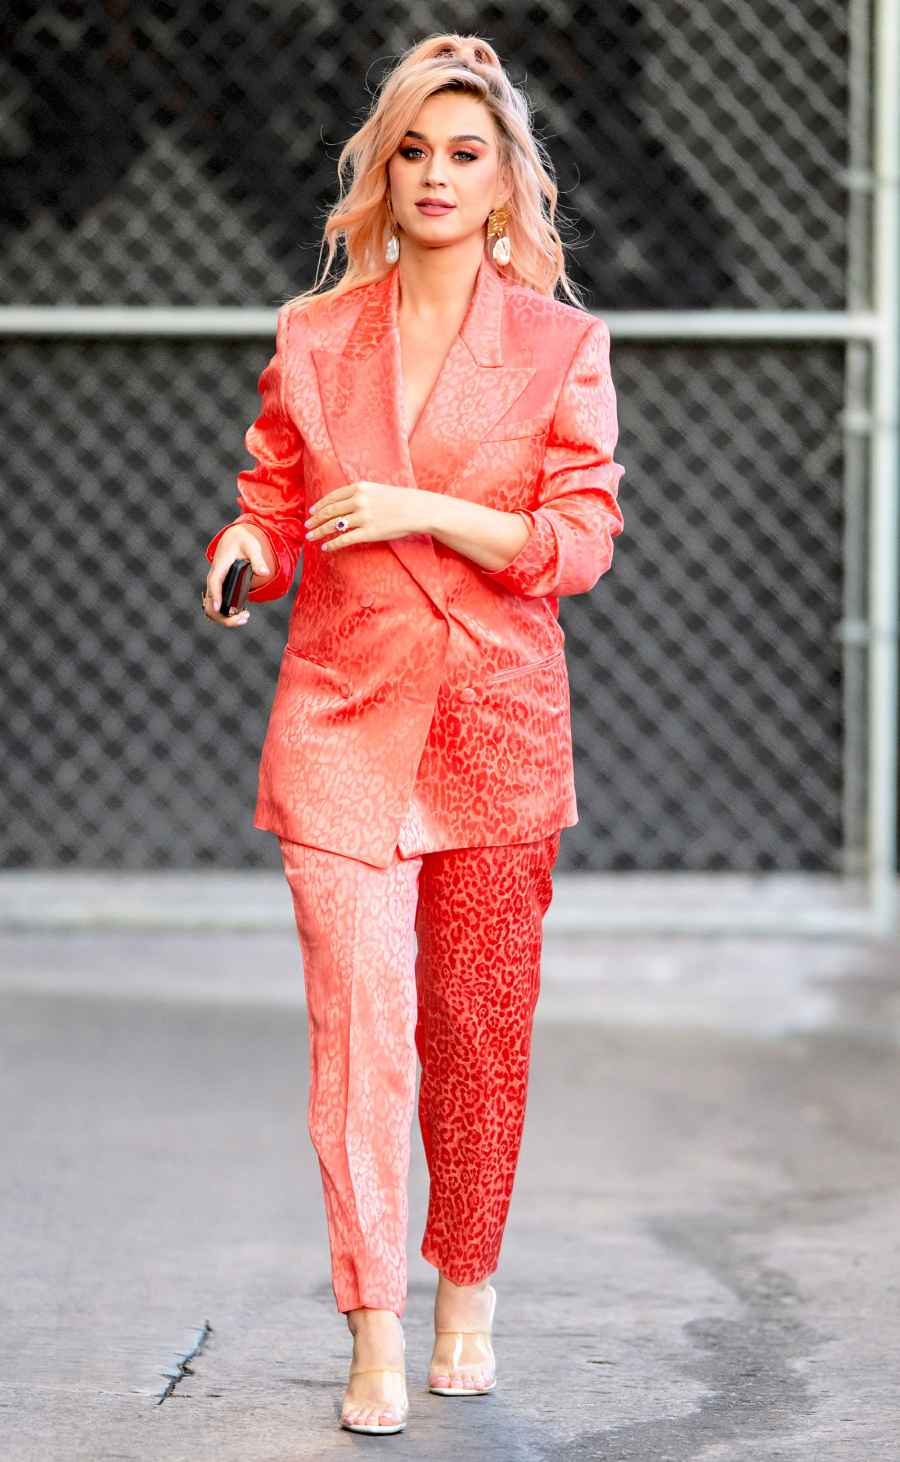 Katy Perry Coral Printed Suit February 12, 2020